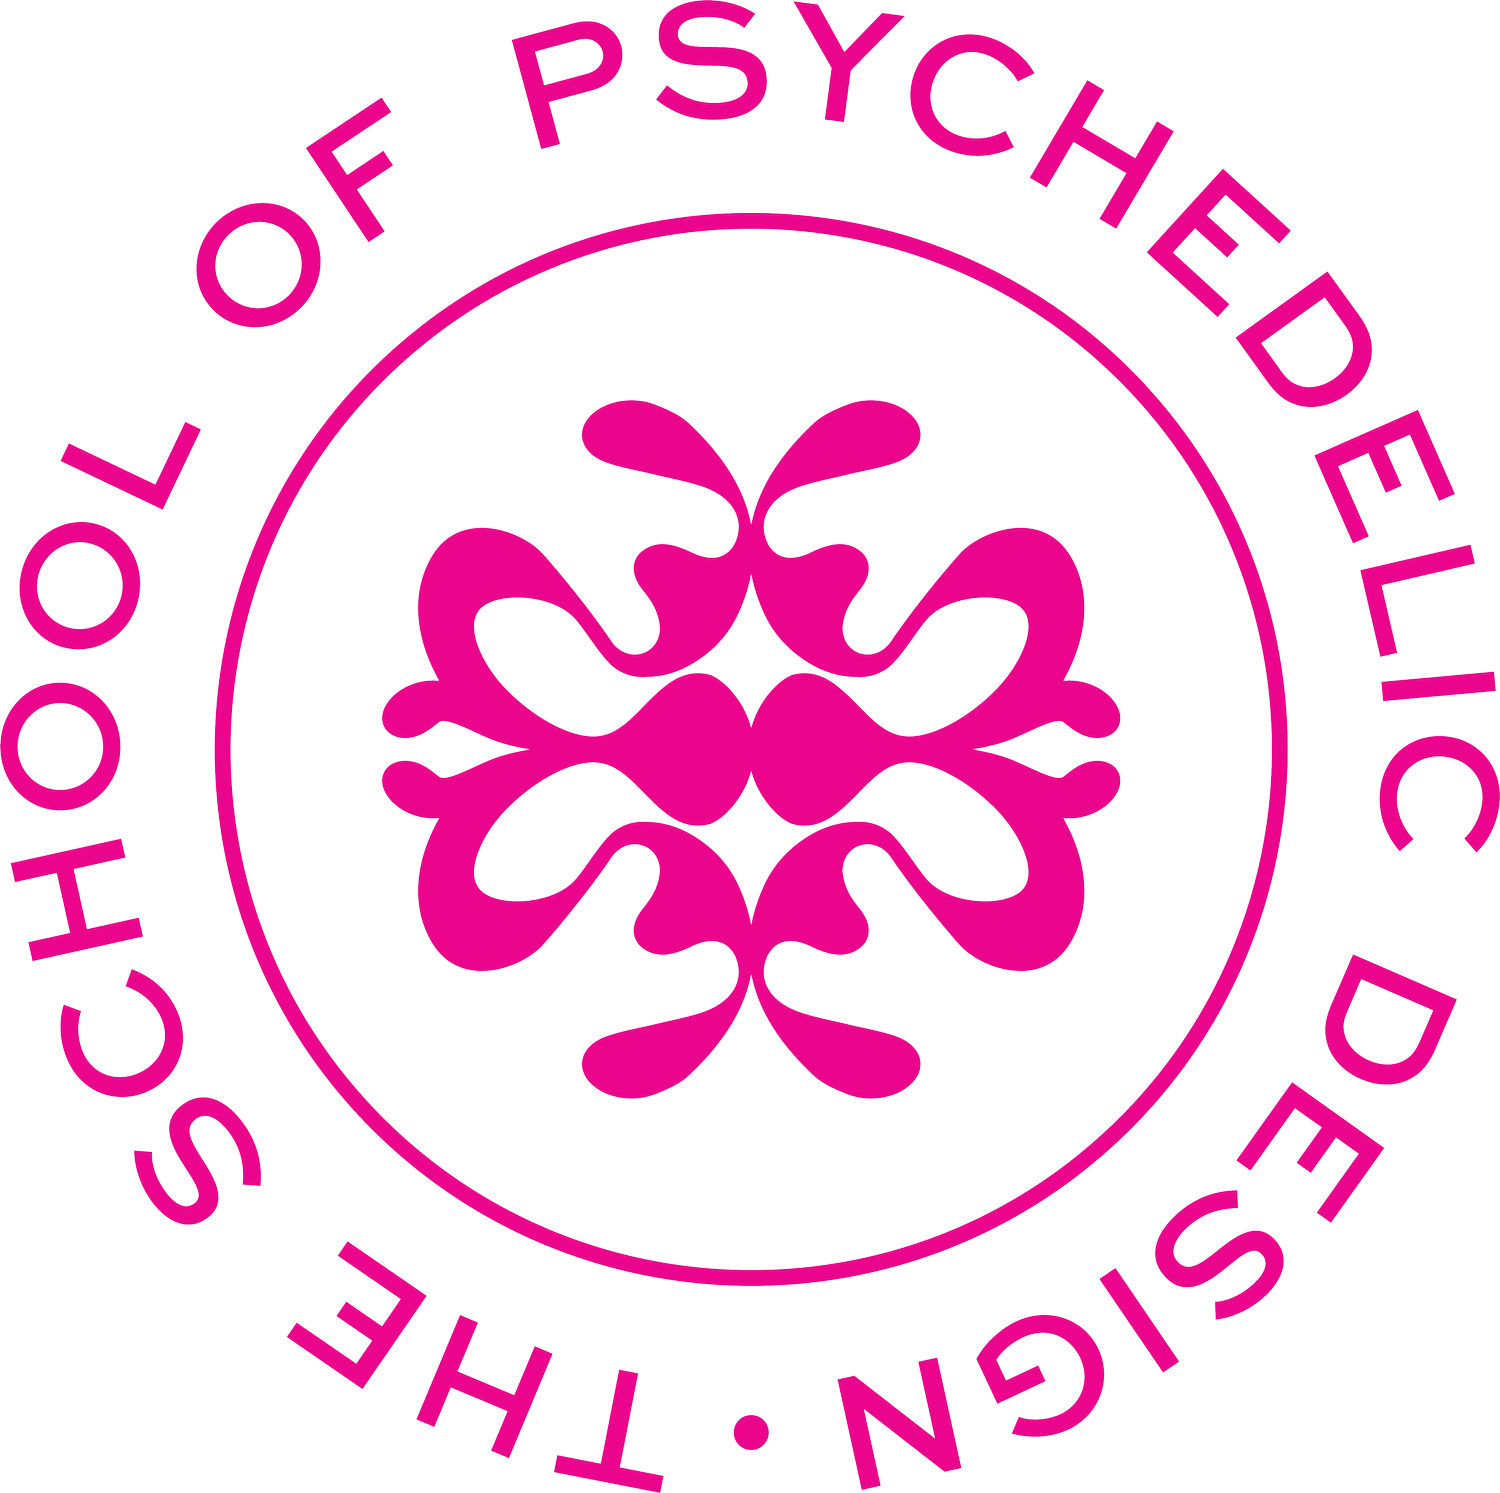 THE SCHOOL OF PSYCHEDELIC DESIGN